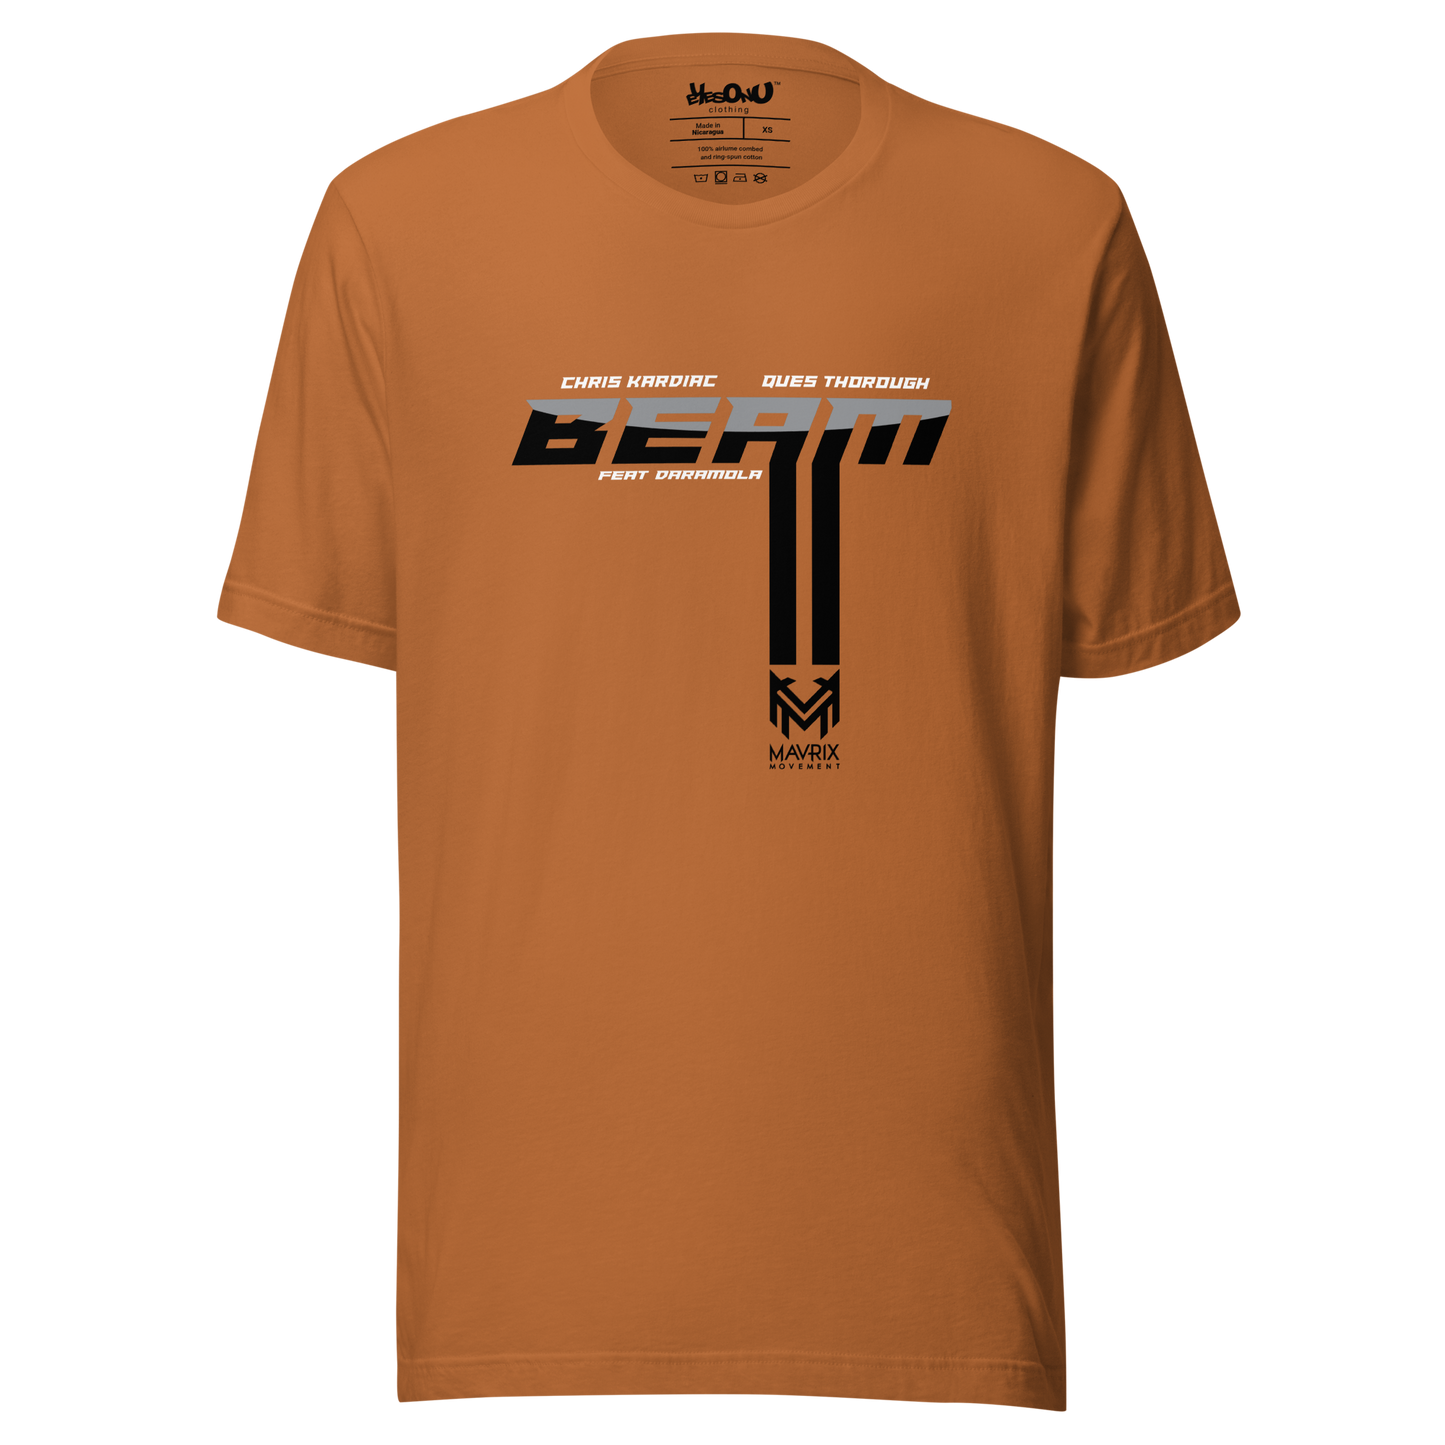 Official Beam T-shirt (4 colors)